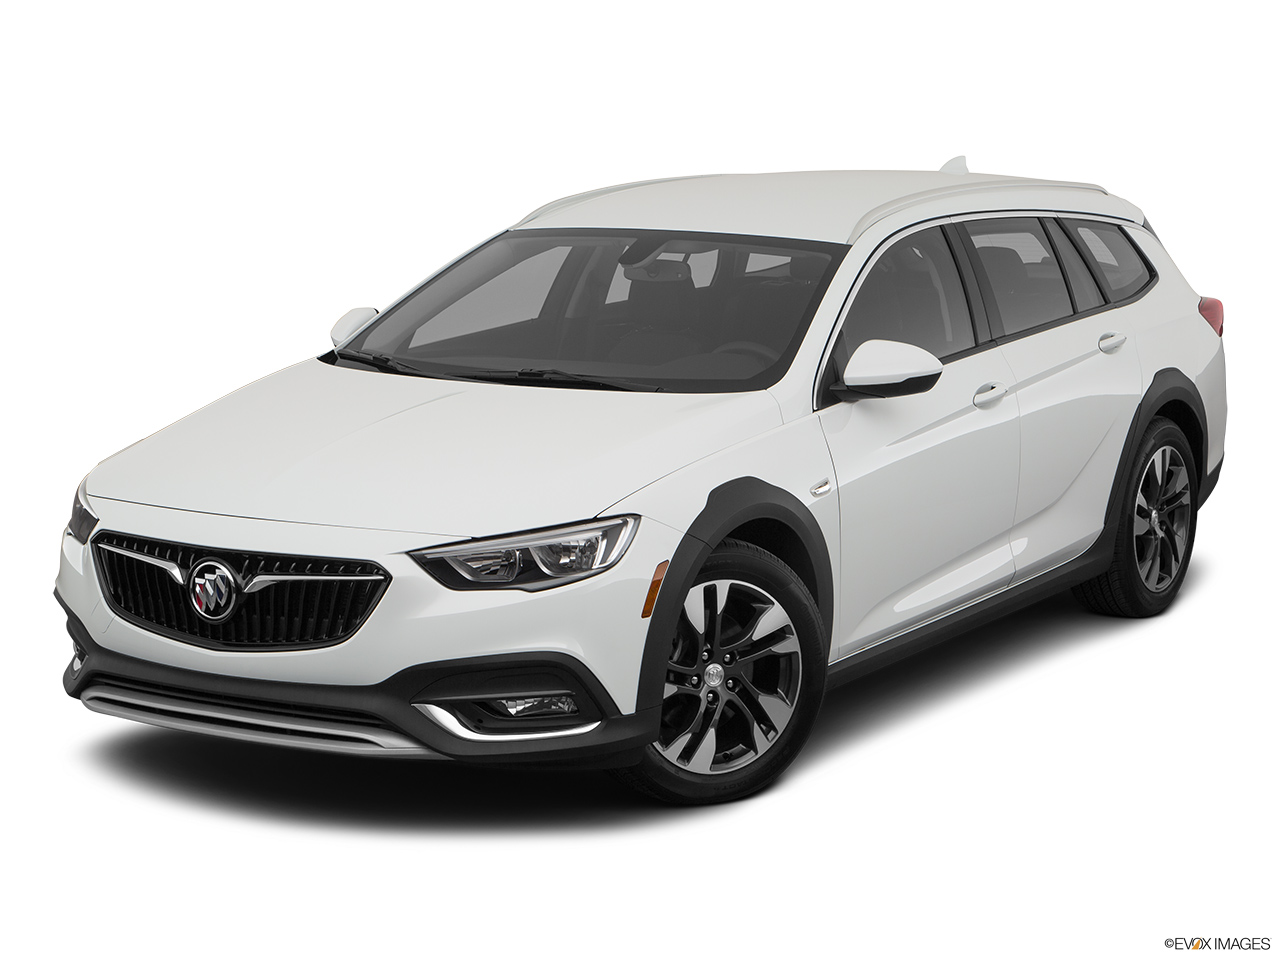 2018 Buick Regal Tourx  Preferred Front angle view. 